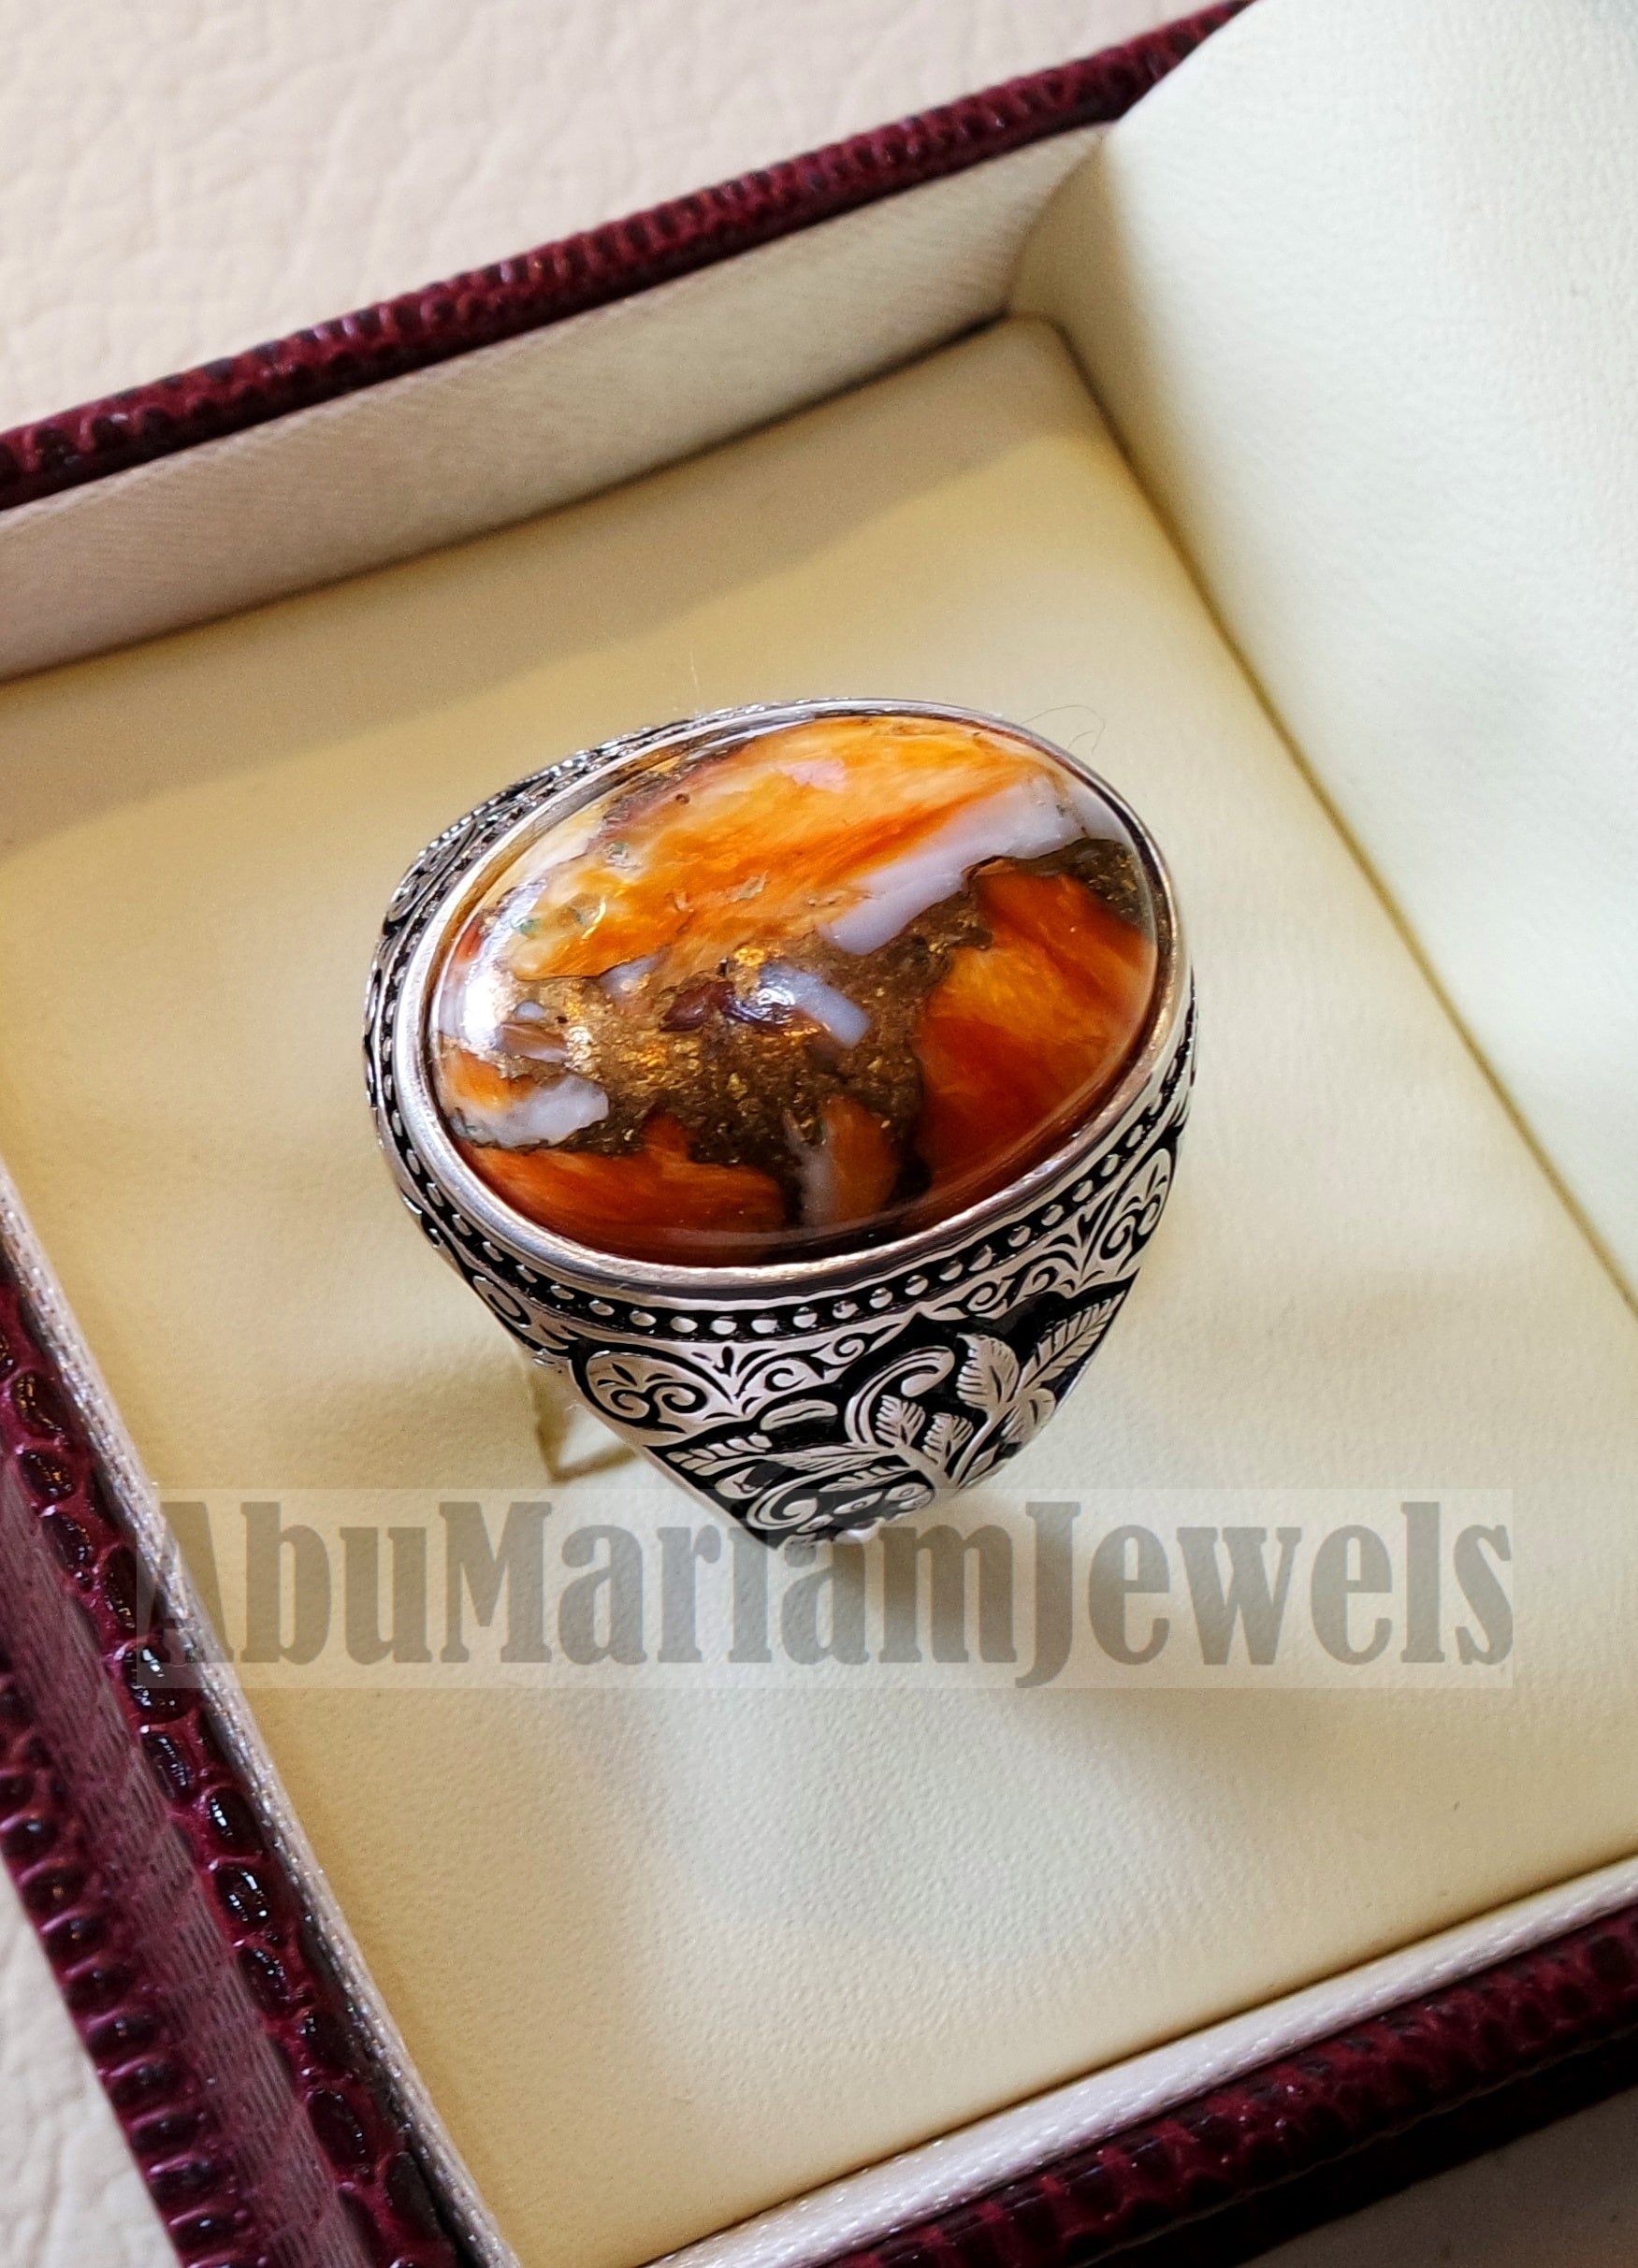 copper oyster man ring natural stone sterling silver 925 oval cabochon semi precious gem ottoman nature style all sizes jewelry